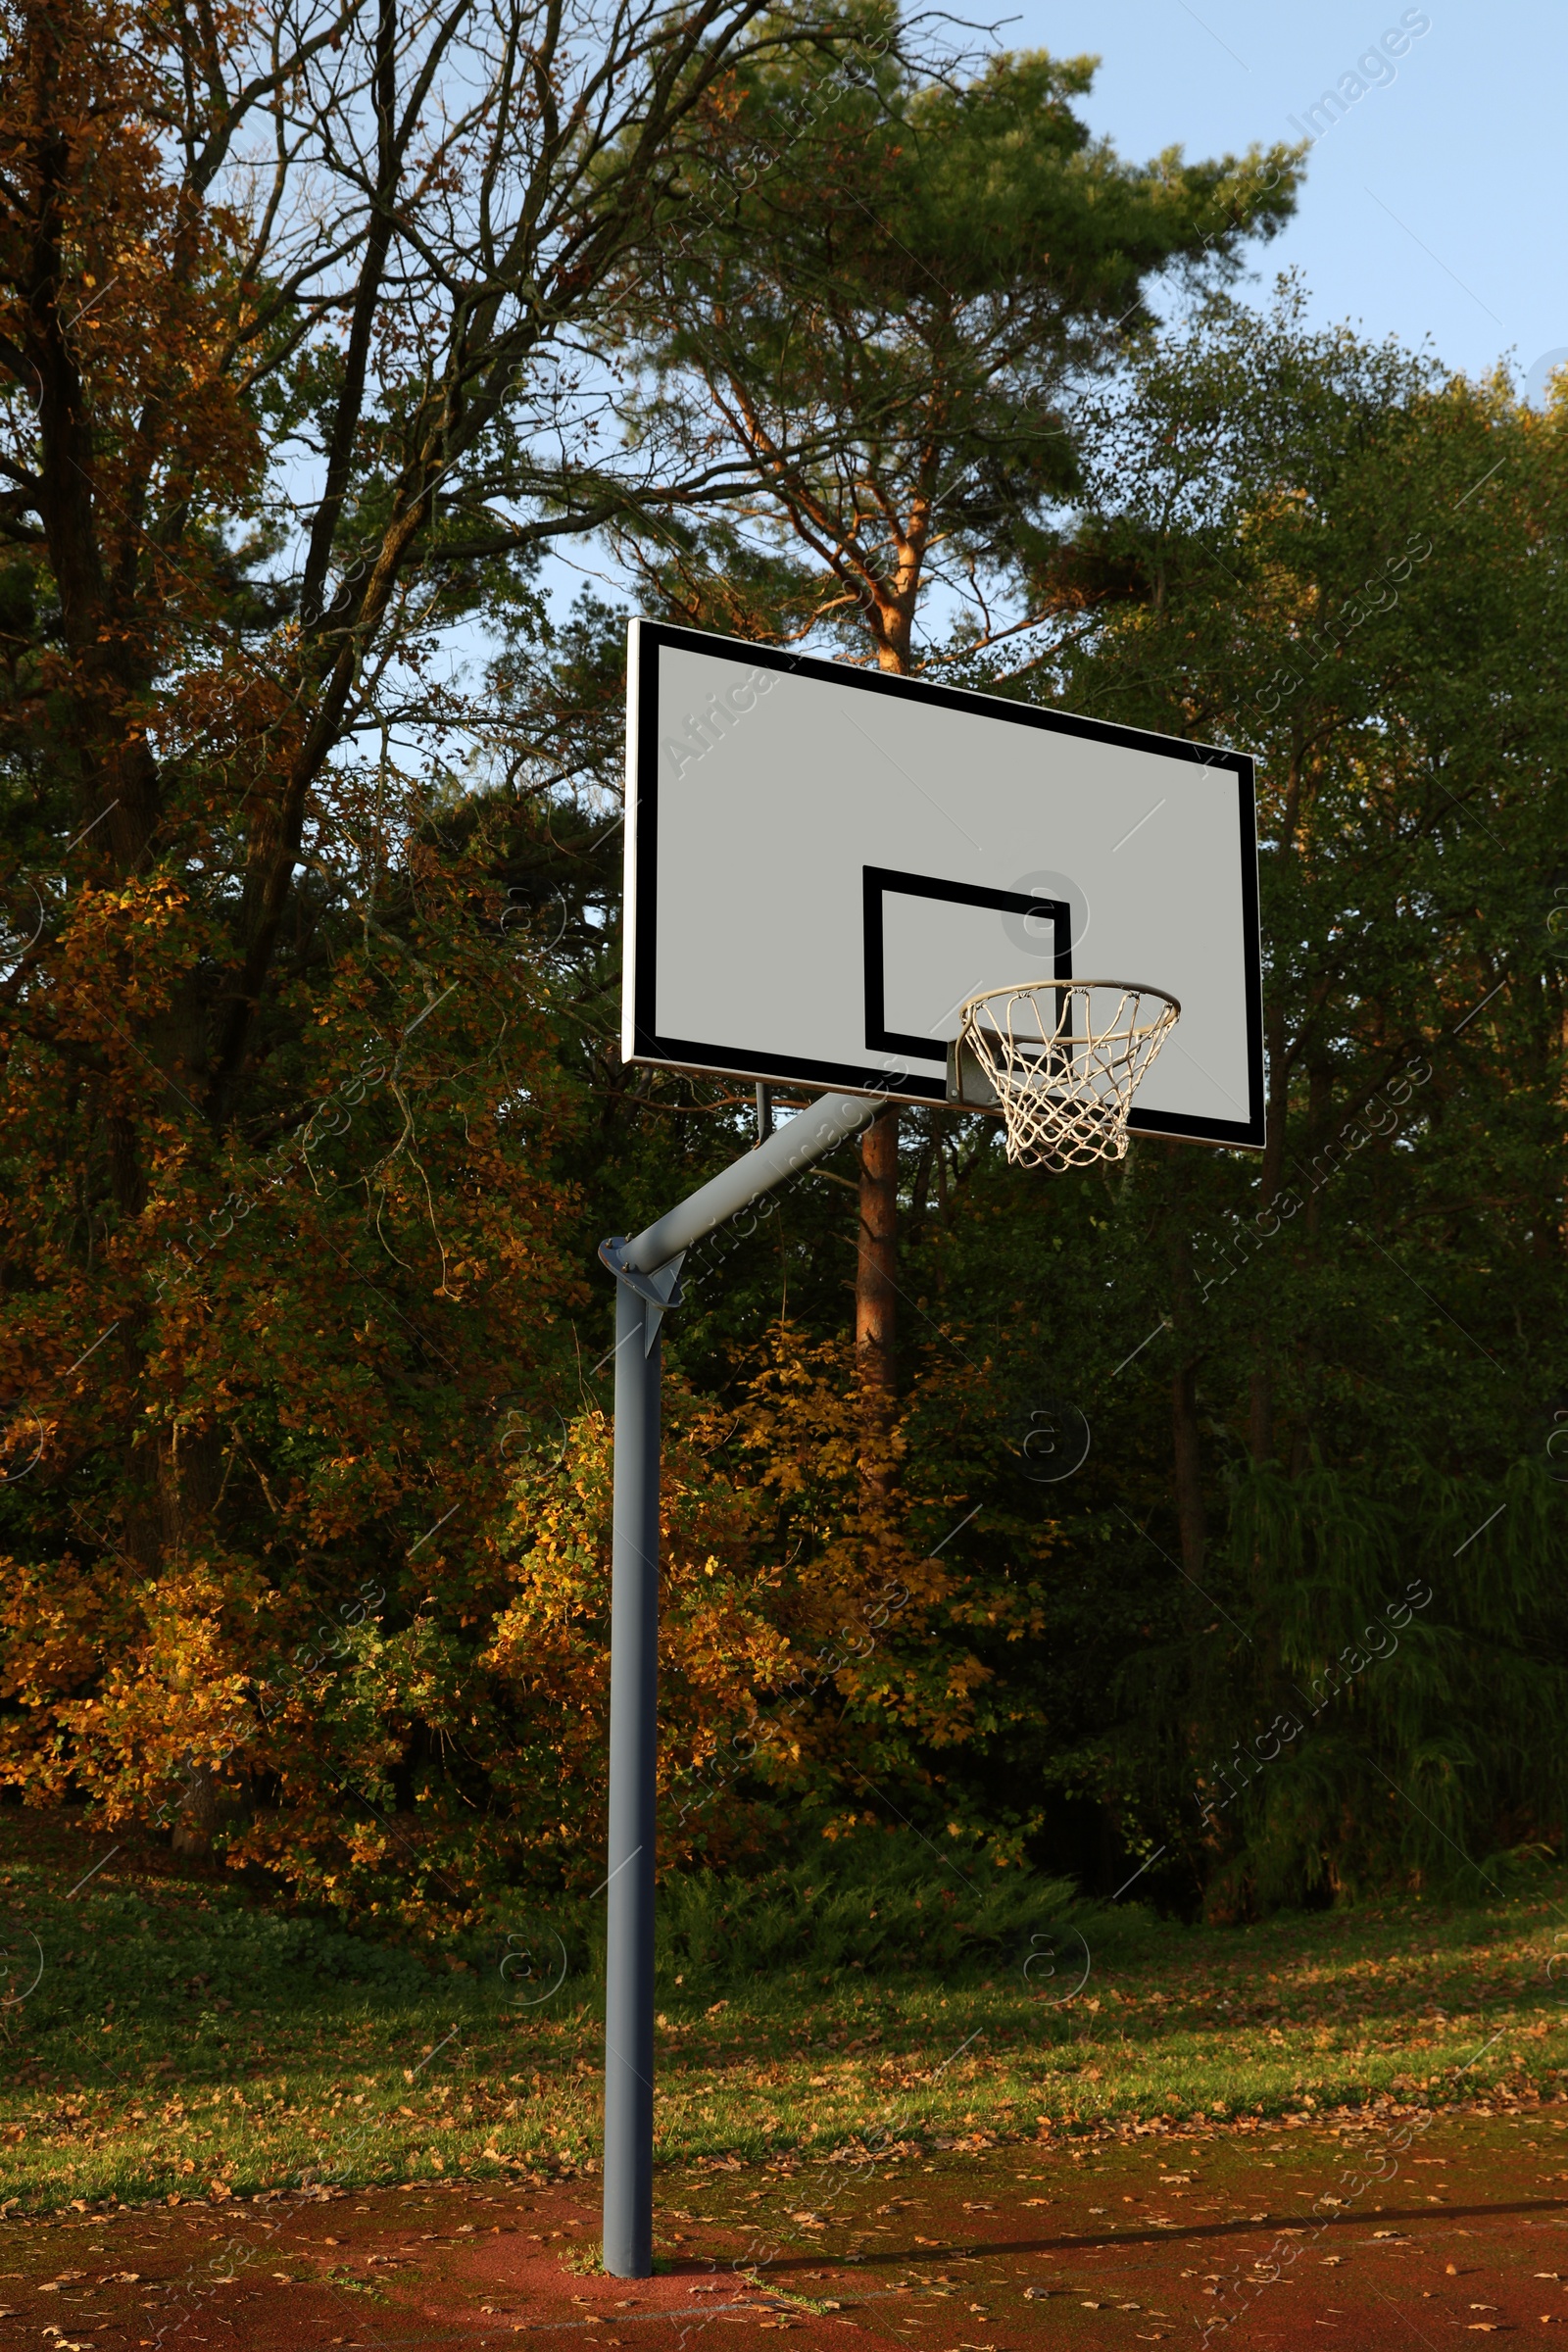 Photo of Basketball backboard with net on court near trees